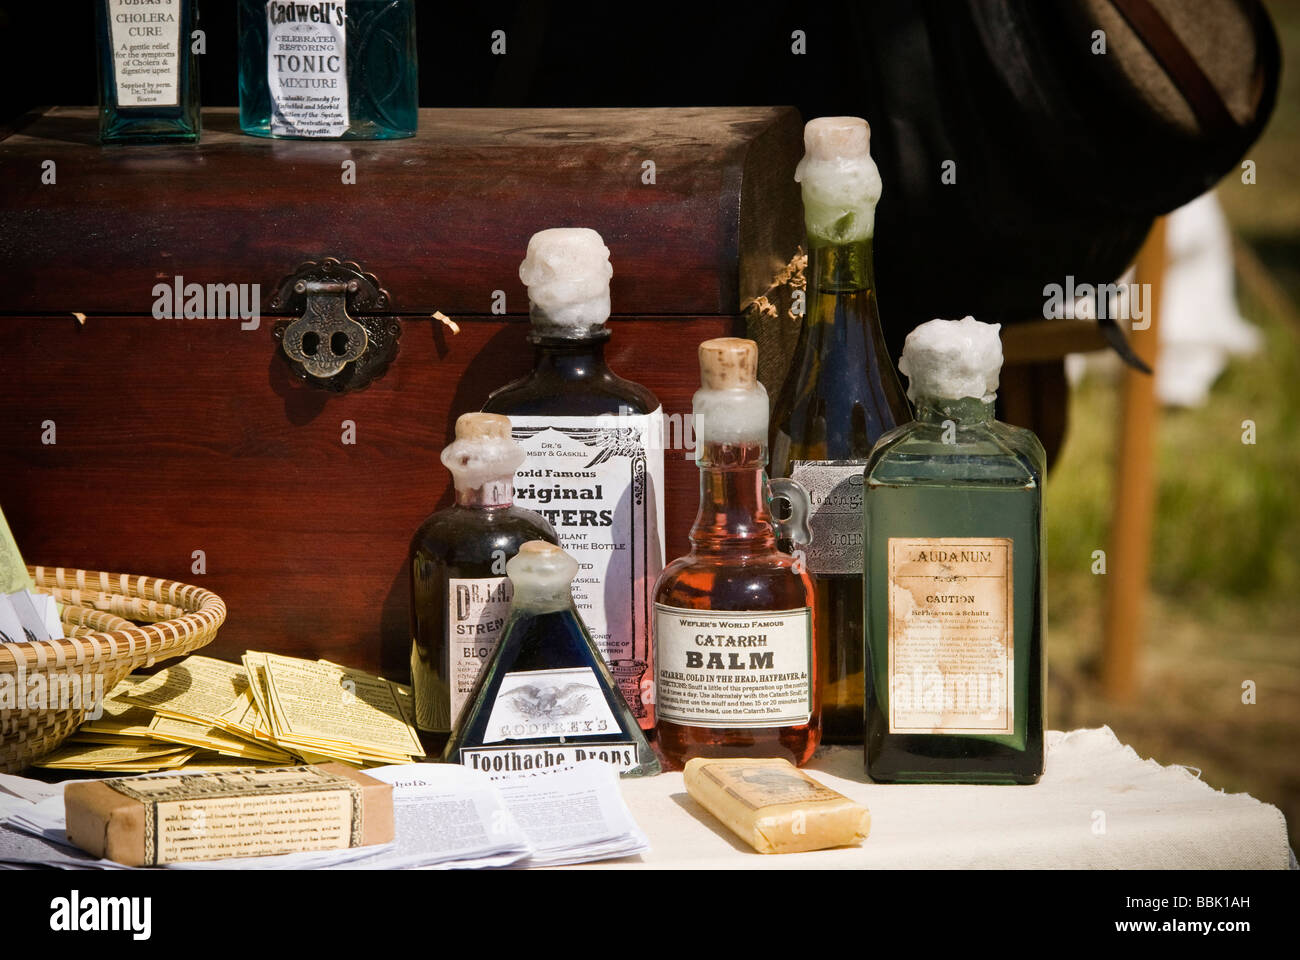 medicine used by doctors during Civil War battles.  Picture taken during a Civil War reinactment. Stock Photo